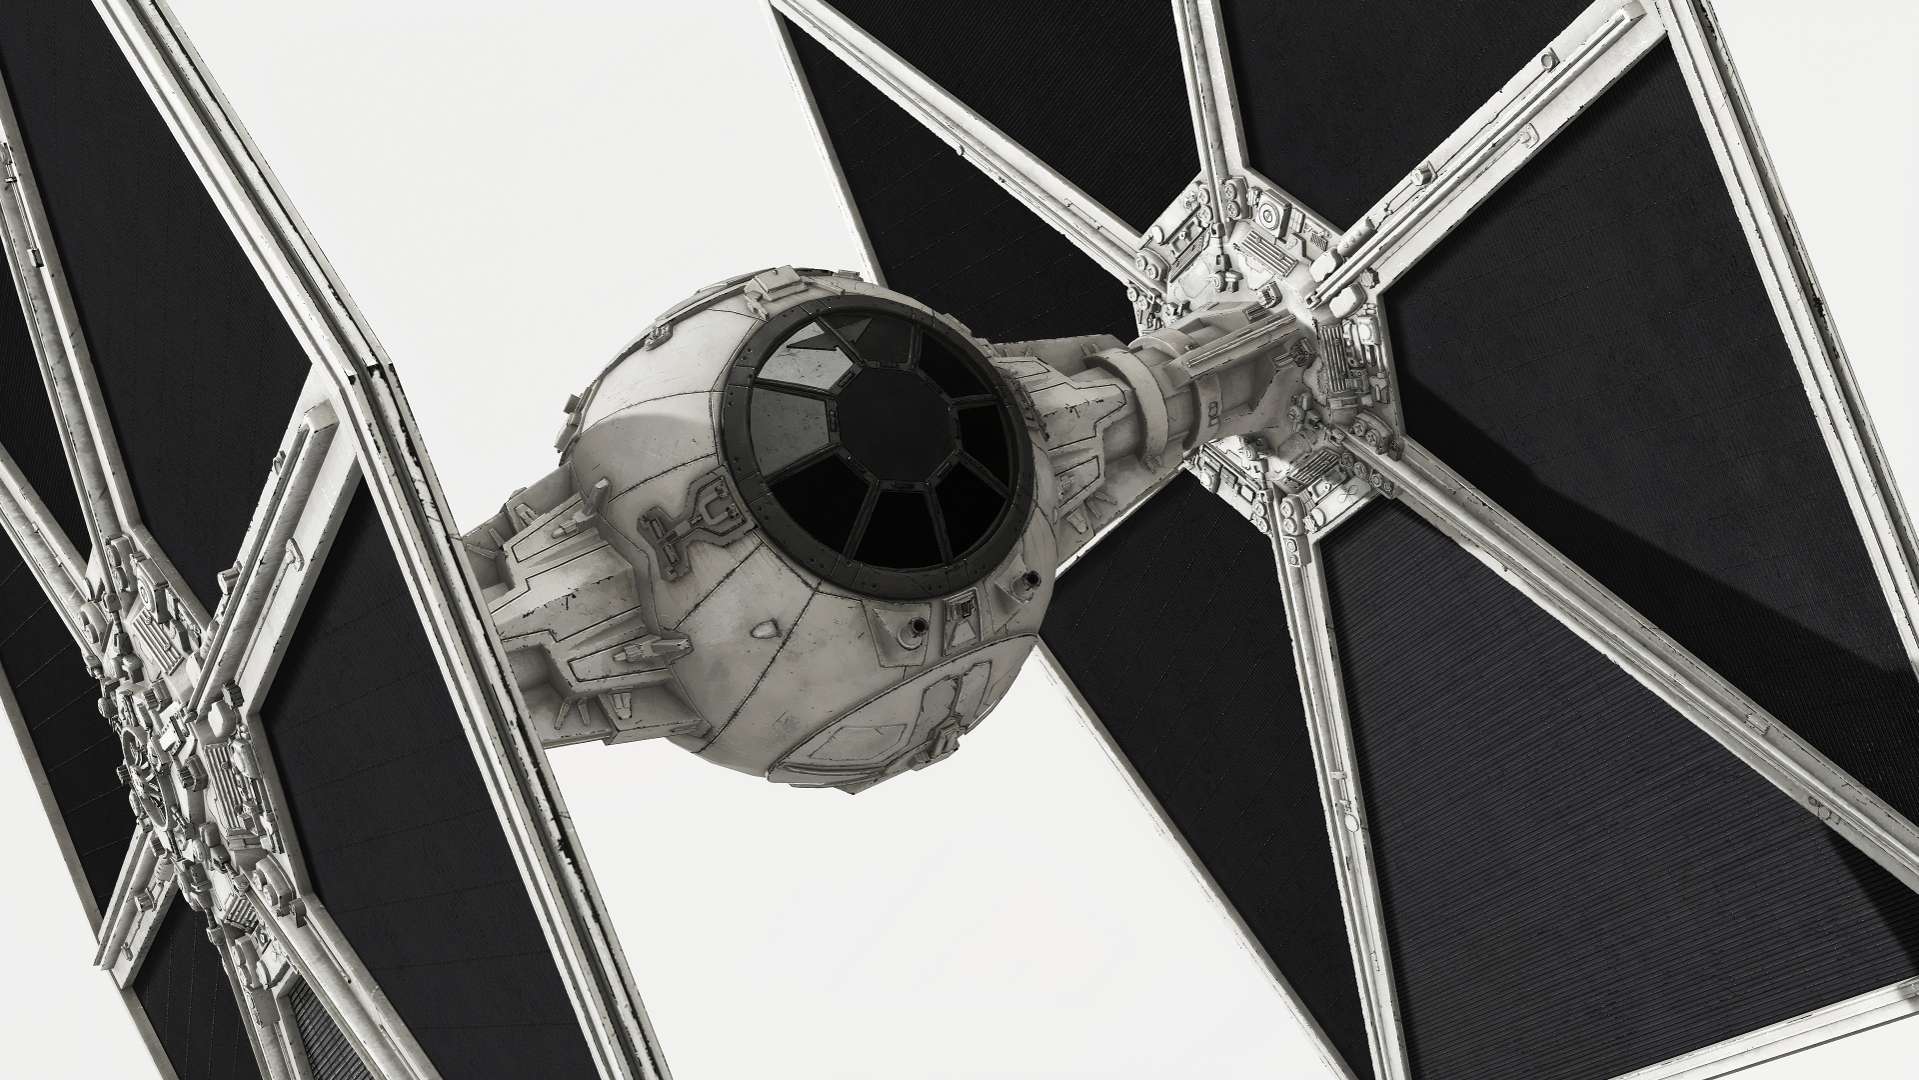 A shot of the TIE Fighter in the Diorama of Battlefront.